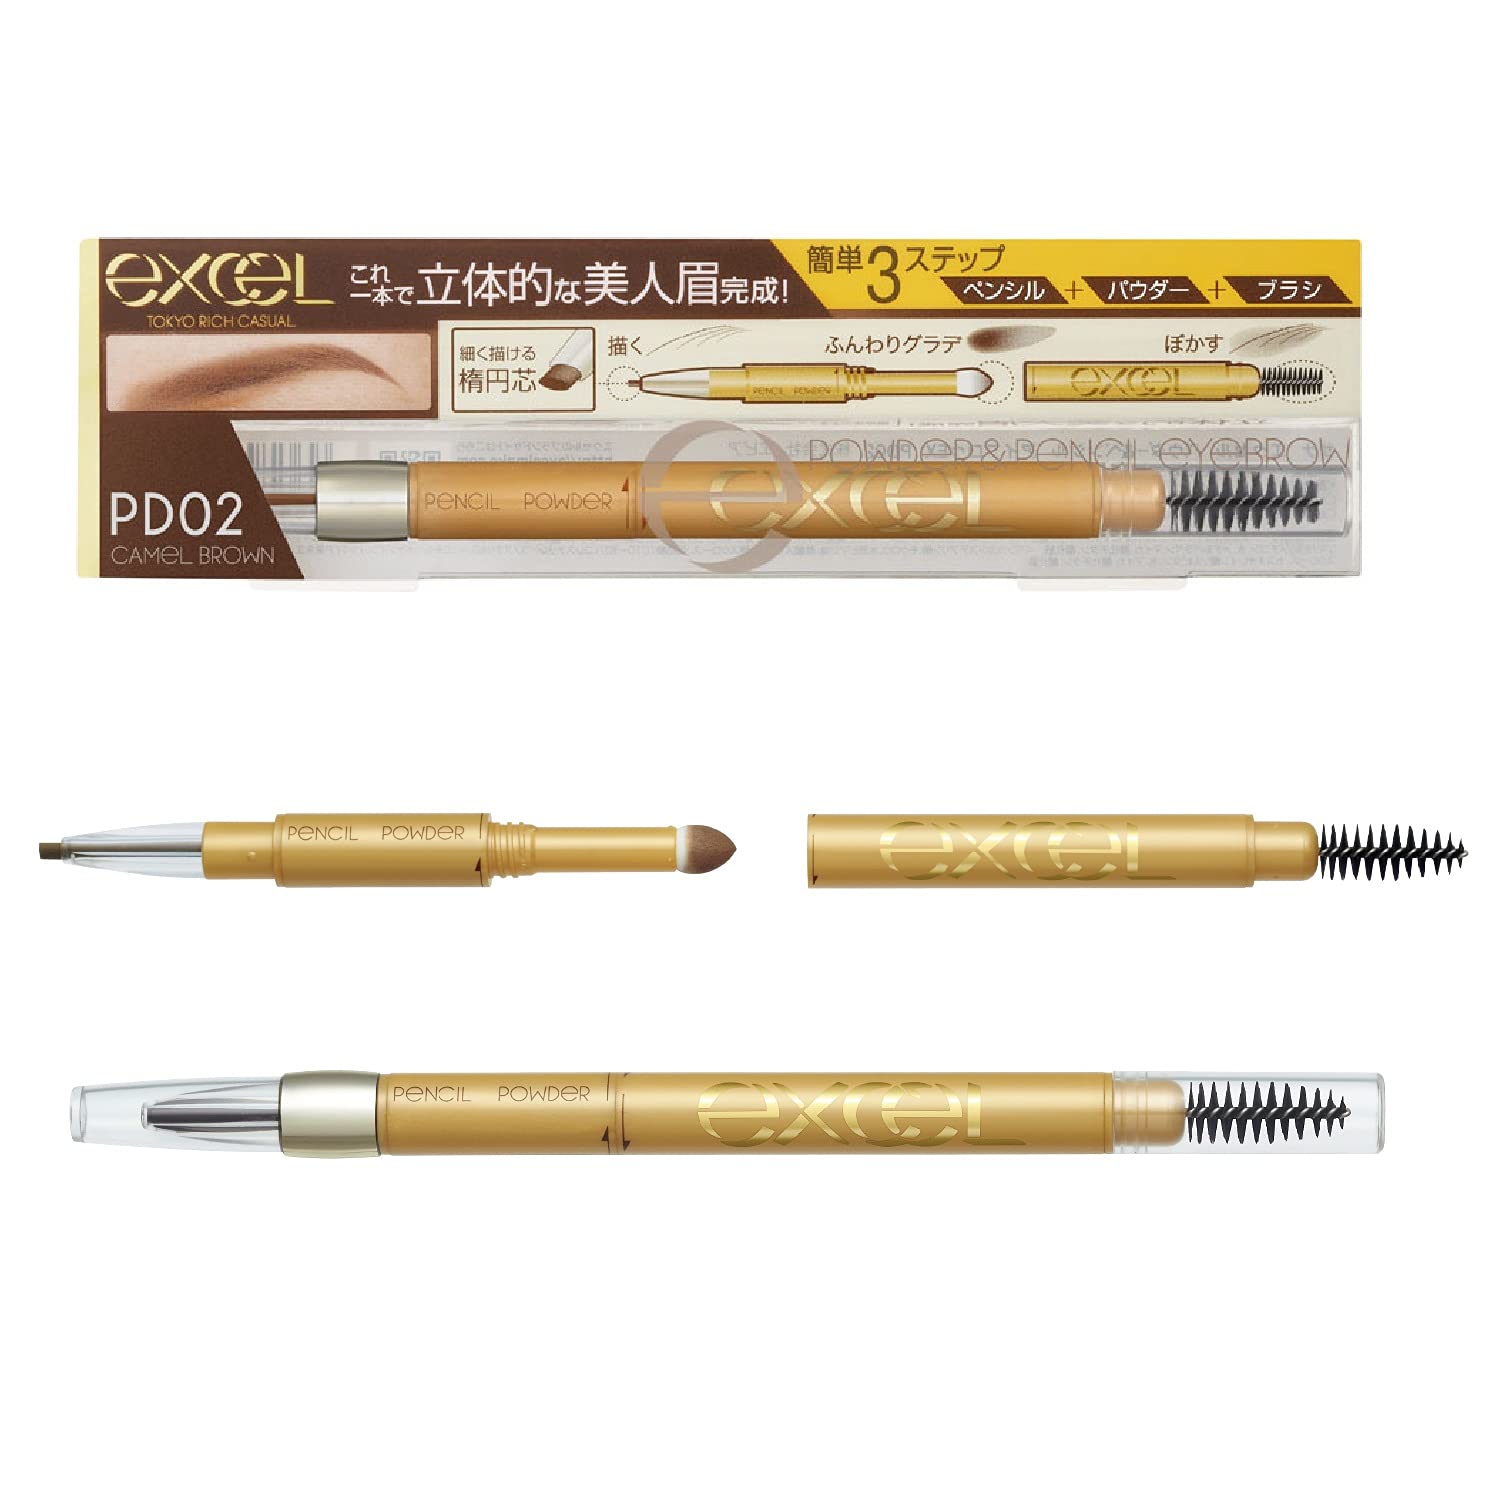 Excel Powder & Pencil Eyebrow EX PD02 (Camel Brown) 3 - in - 1 - Eyebrown From Japanese Brand